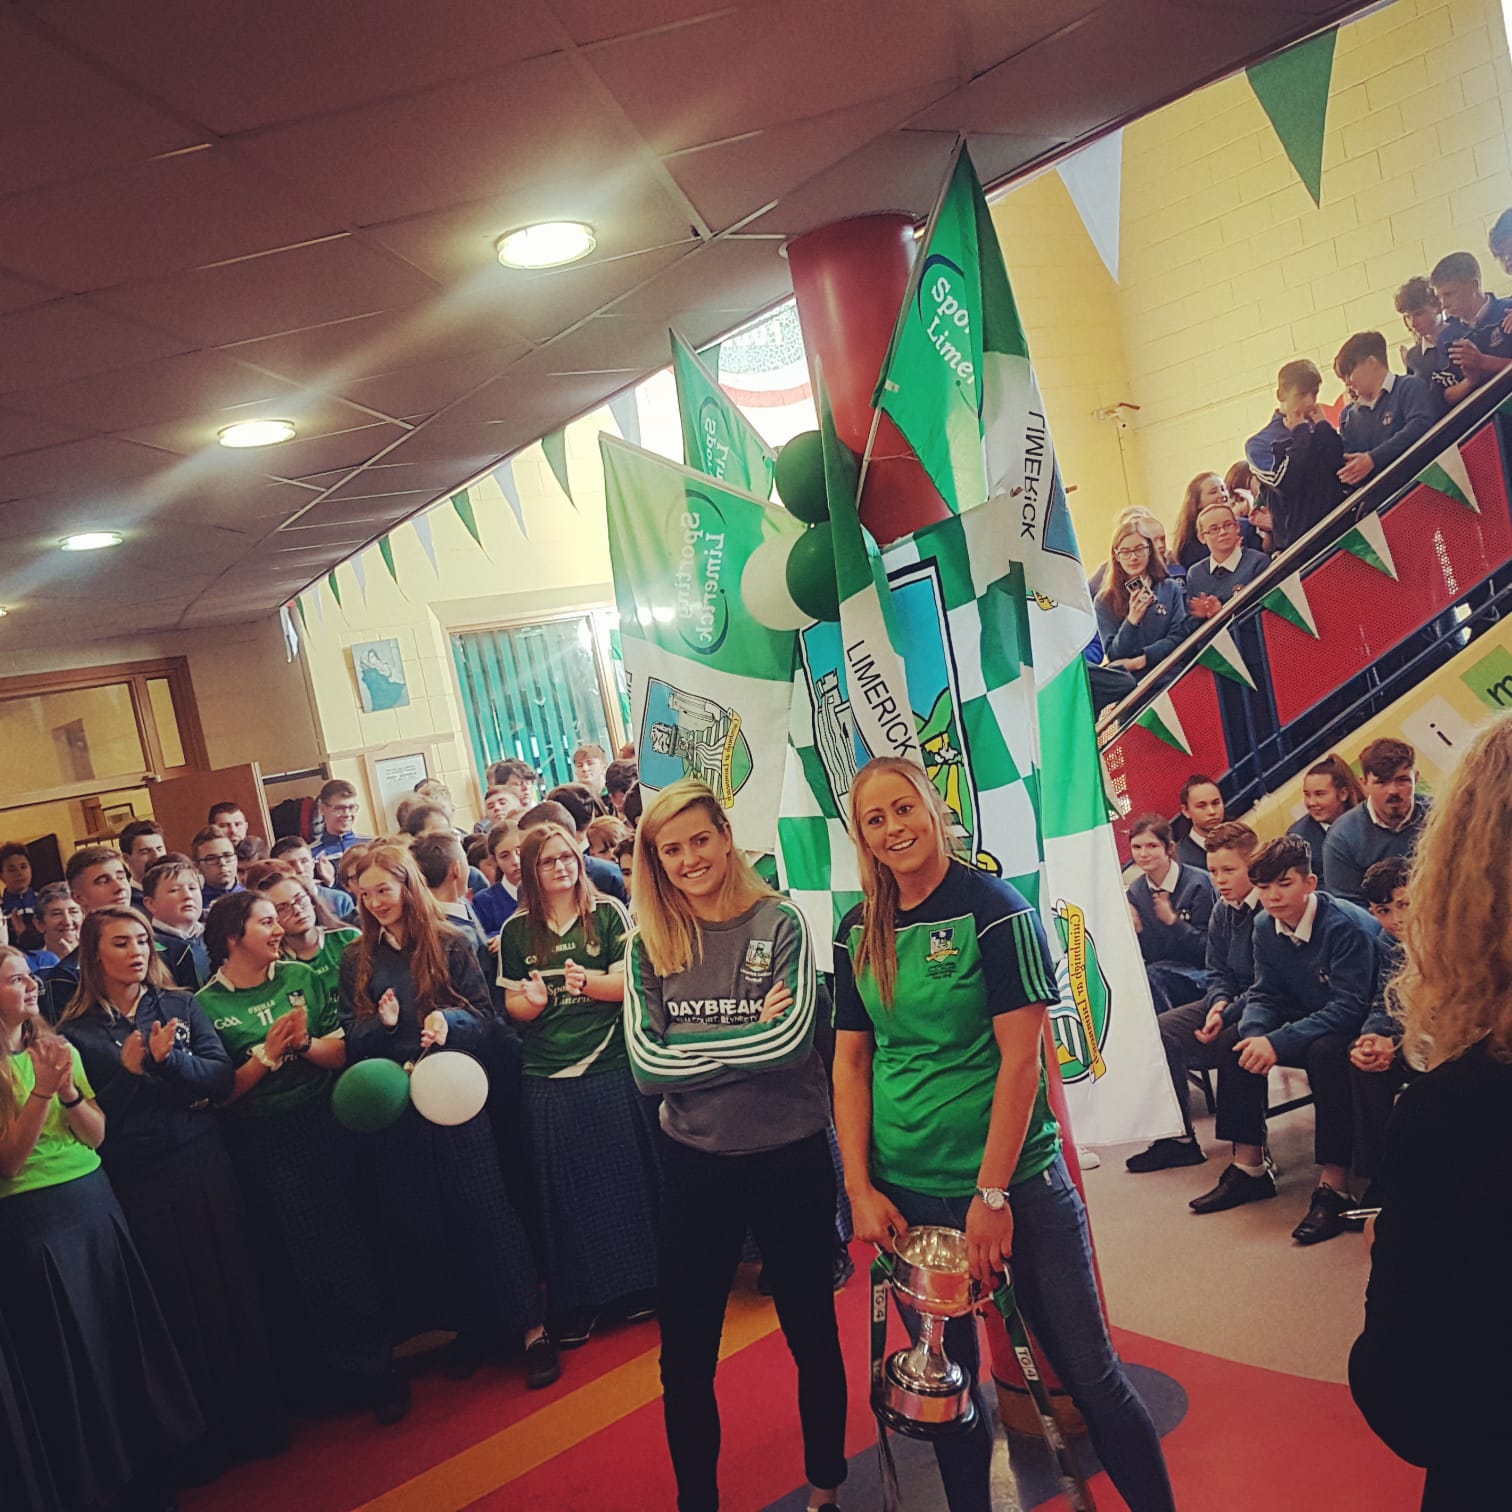 Desmond College and Colaiste are visited by All Ireland Football Champions and past pupils, Catriona Davis and Rebecca Delee